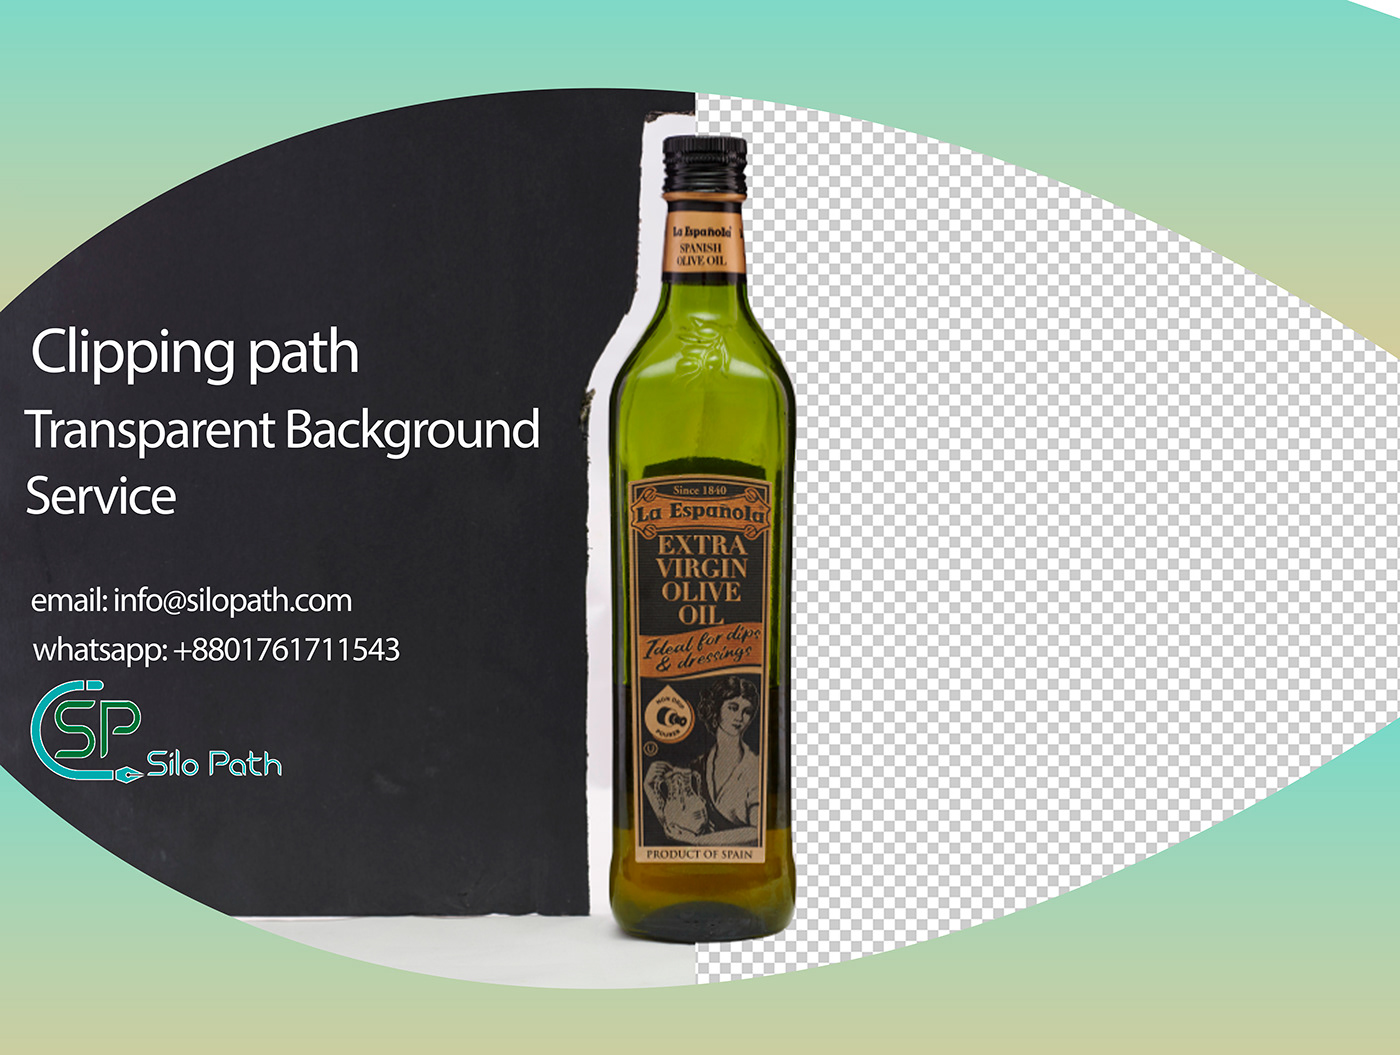 Clipping Path and Transparent Background Services at Silo Path